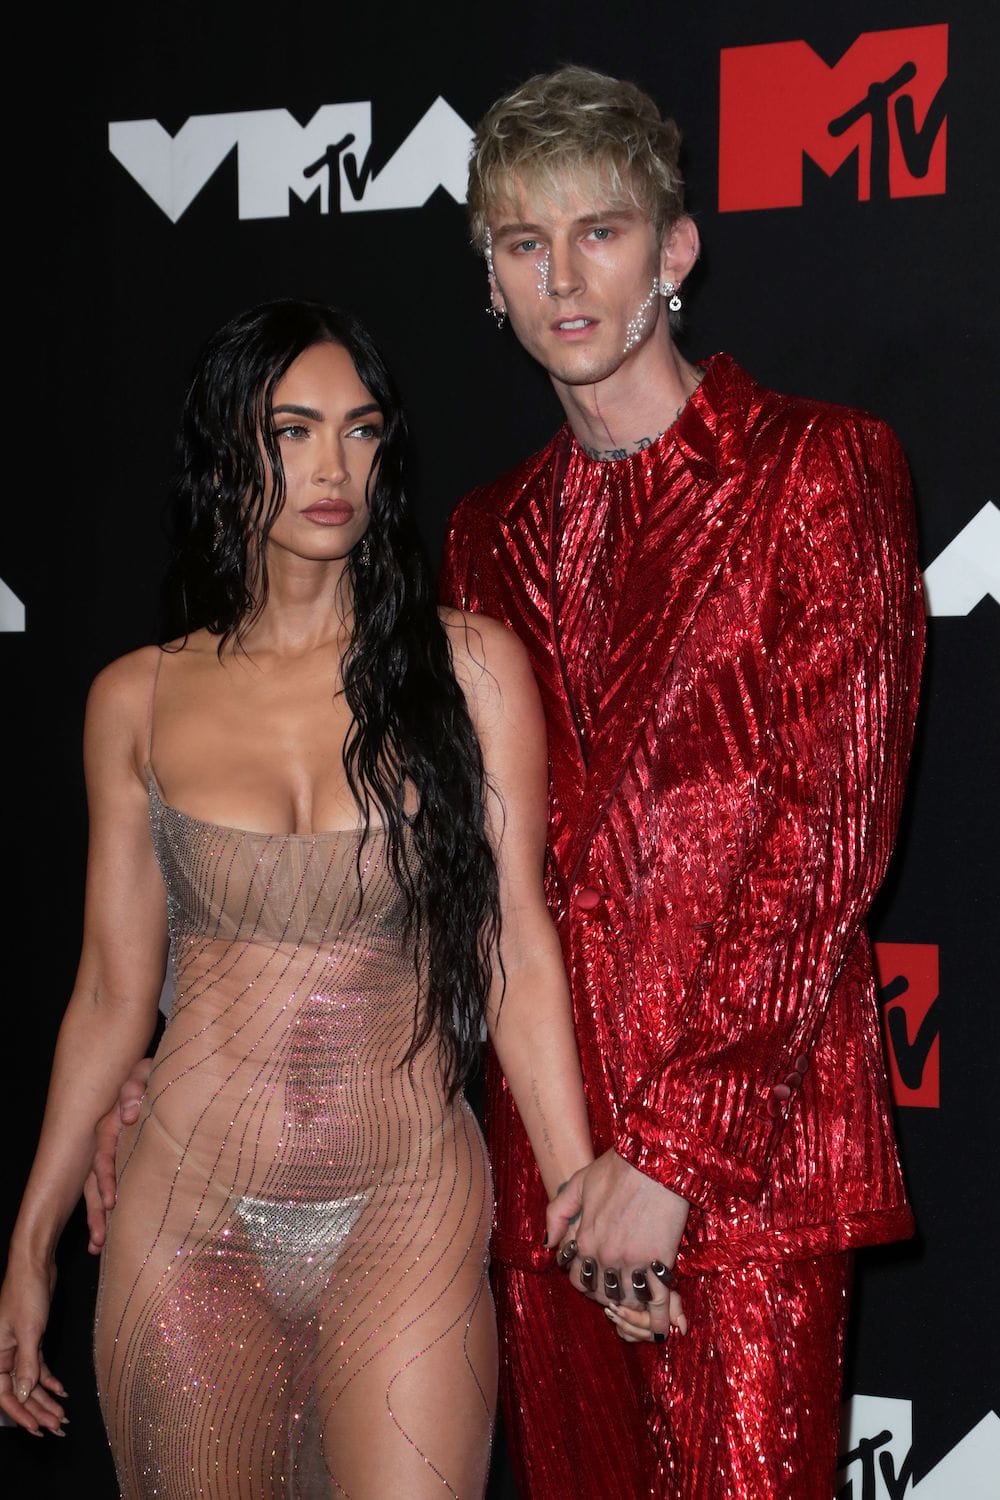 Megan Fox in a transparent dress with her boyfriend MGK on the red carpet of the 2021 MTV VMAs at Barclays Center in Brooklyn, New York on September 12th, 2021.